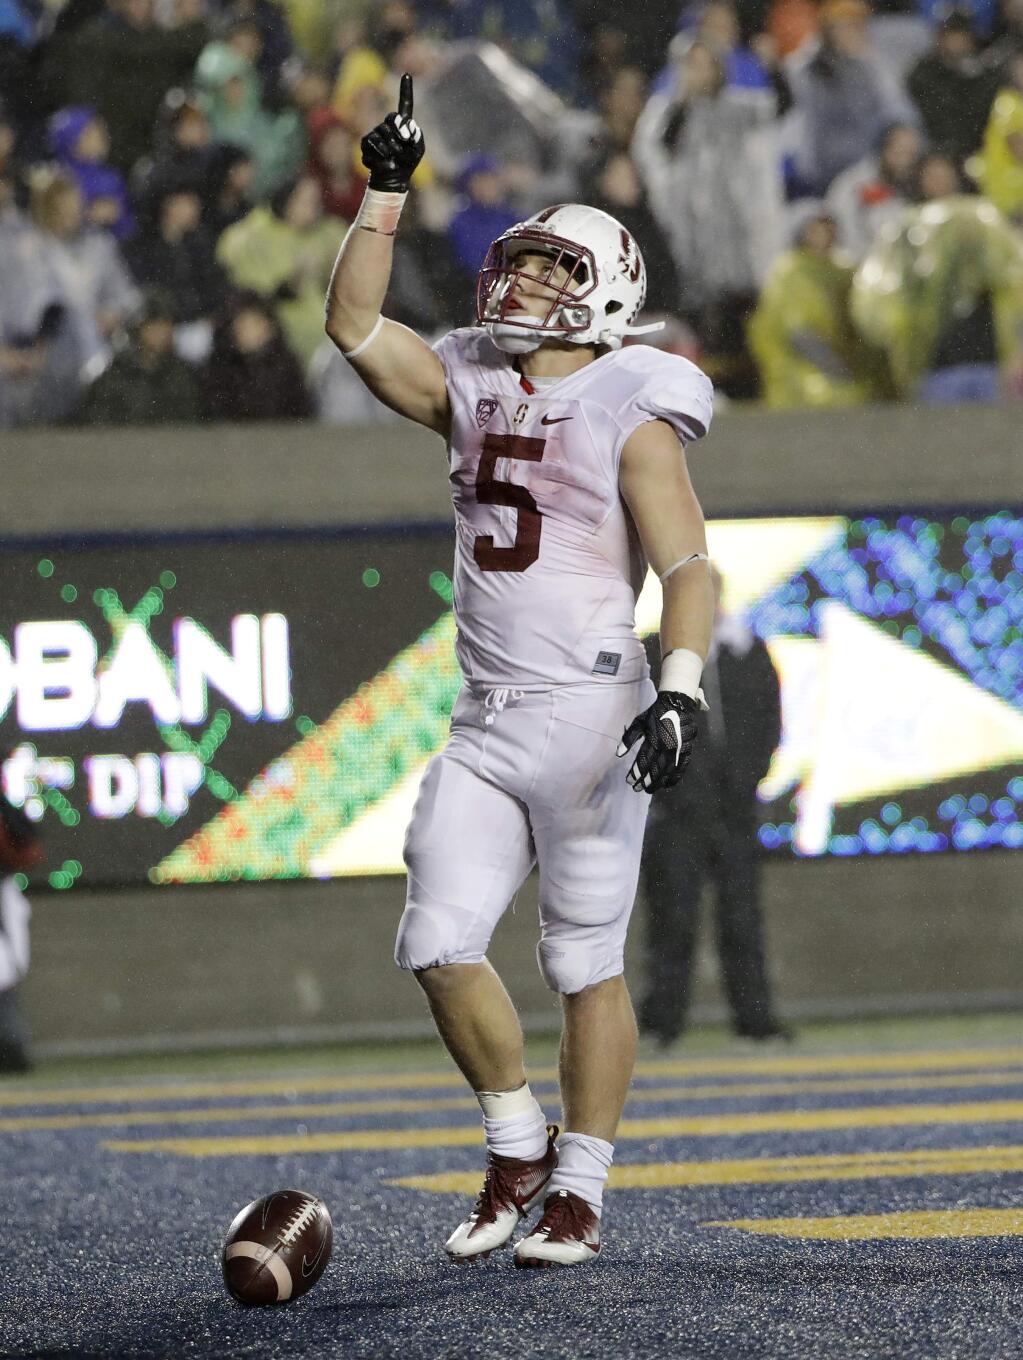 Stanford running back Christian McCaffrey, celebrates after scoring on a 11-yard run against California during the second half of an NCAA college football game Saturday, Nov. 19, 2016, in Berkeley, Calif. Stanford won 45-31. (AP Photo/Marcio Jose Sanchez)